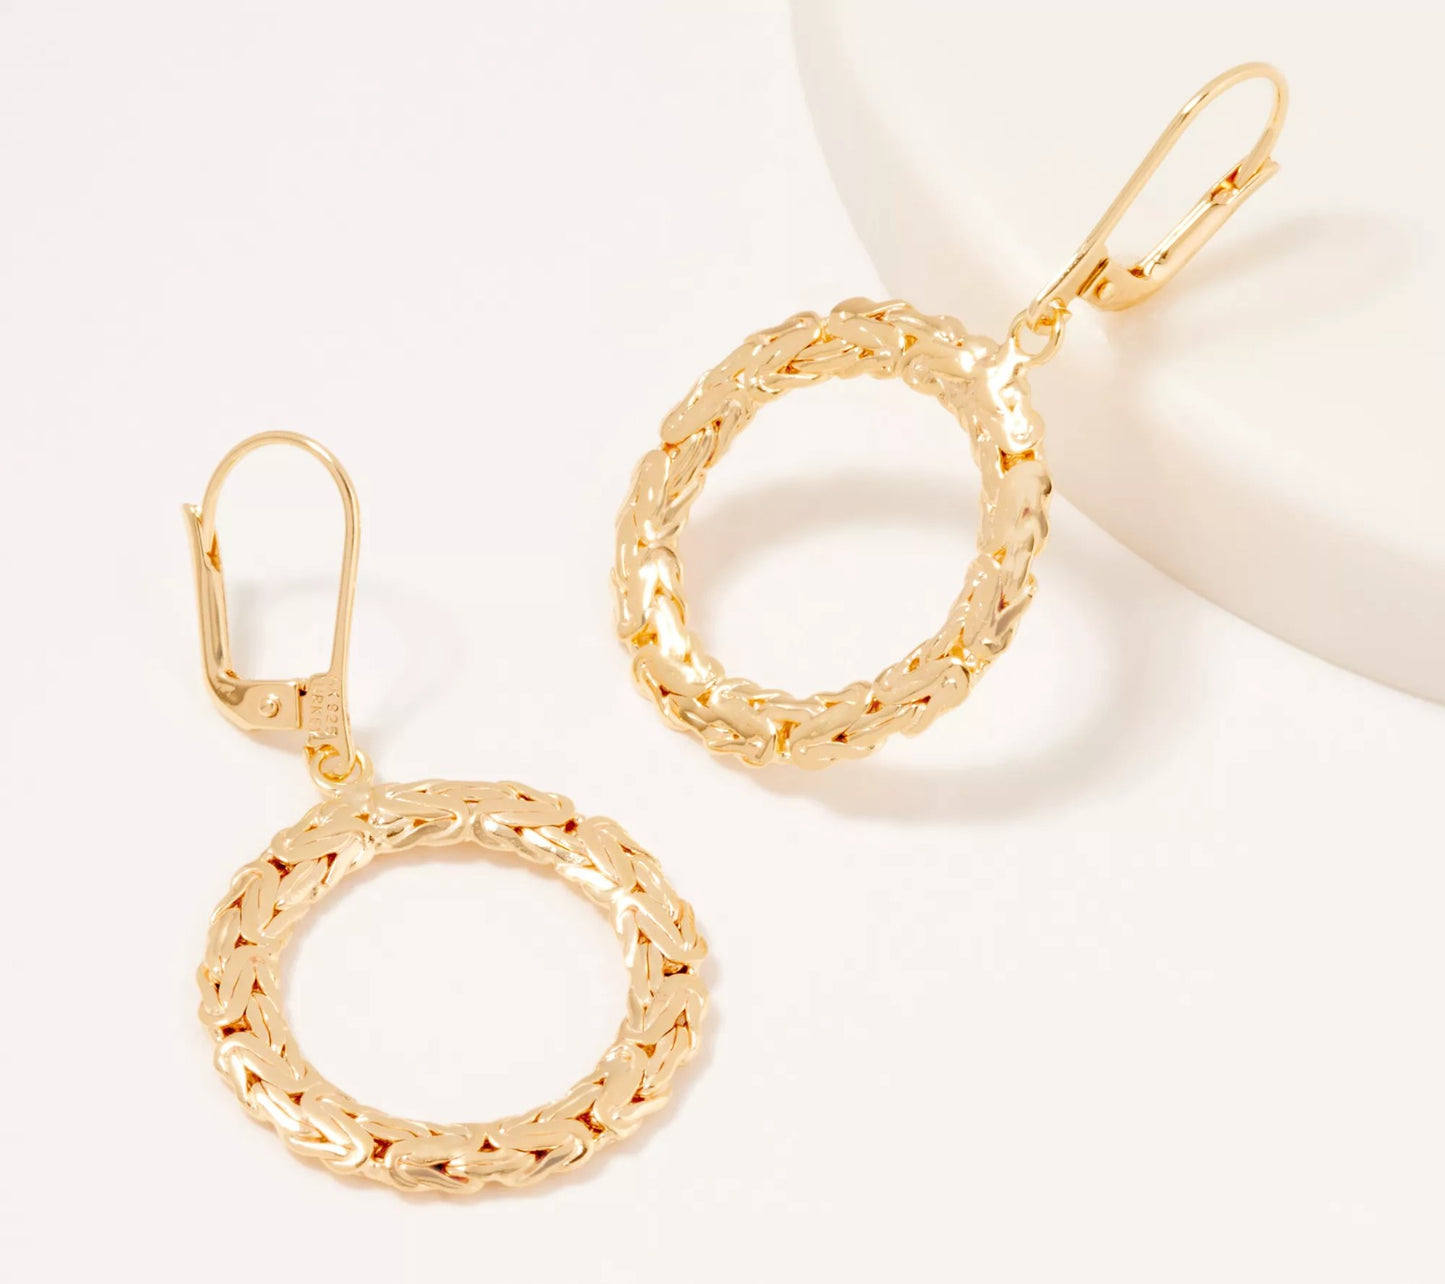 Sterling silver, 14K Yellow Gold Byzantine Circle Hoop Earrings by Silver Style